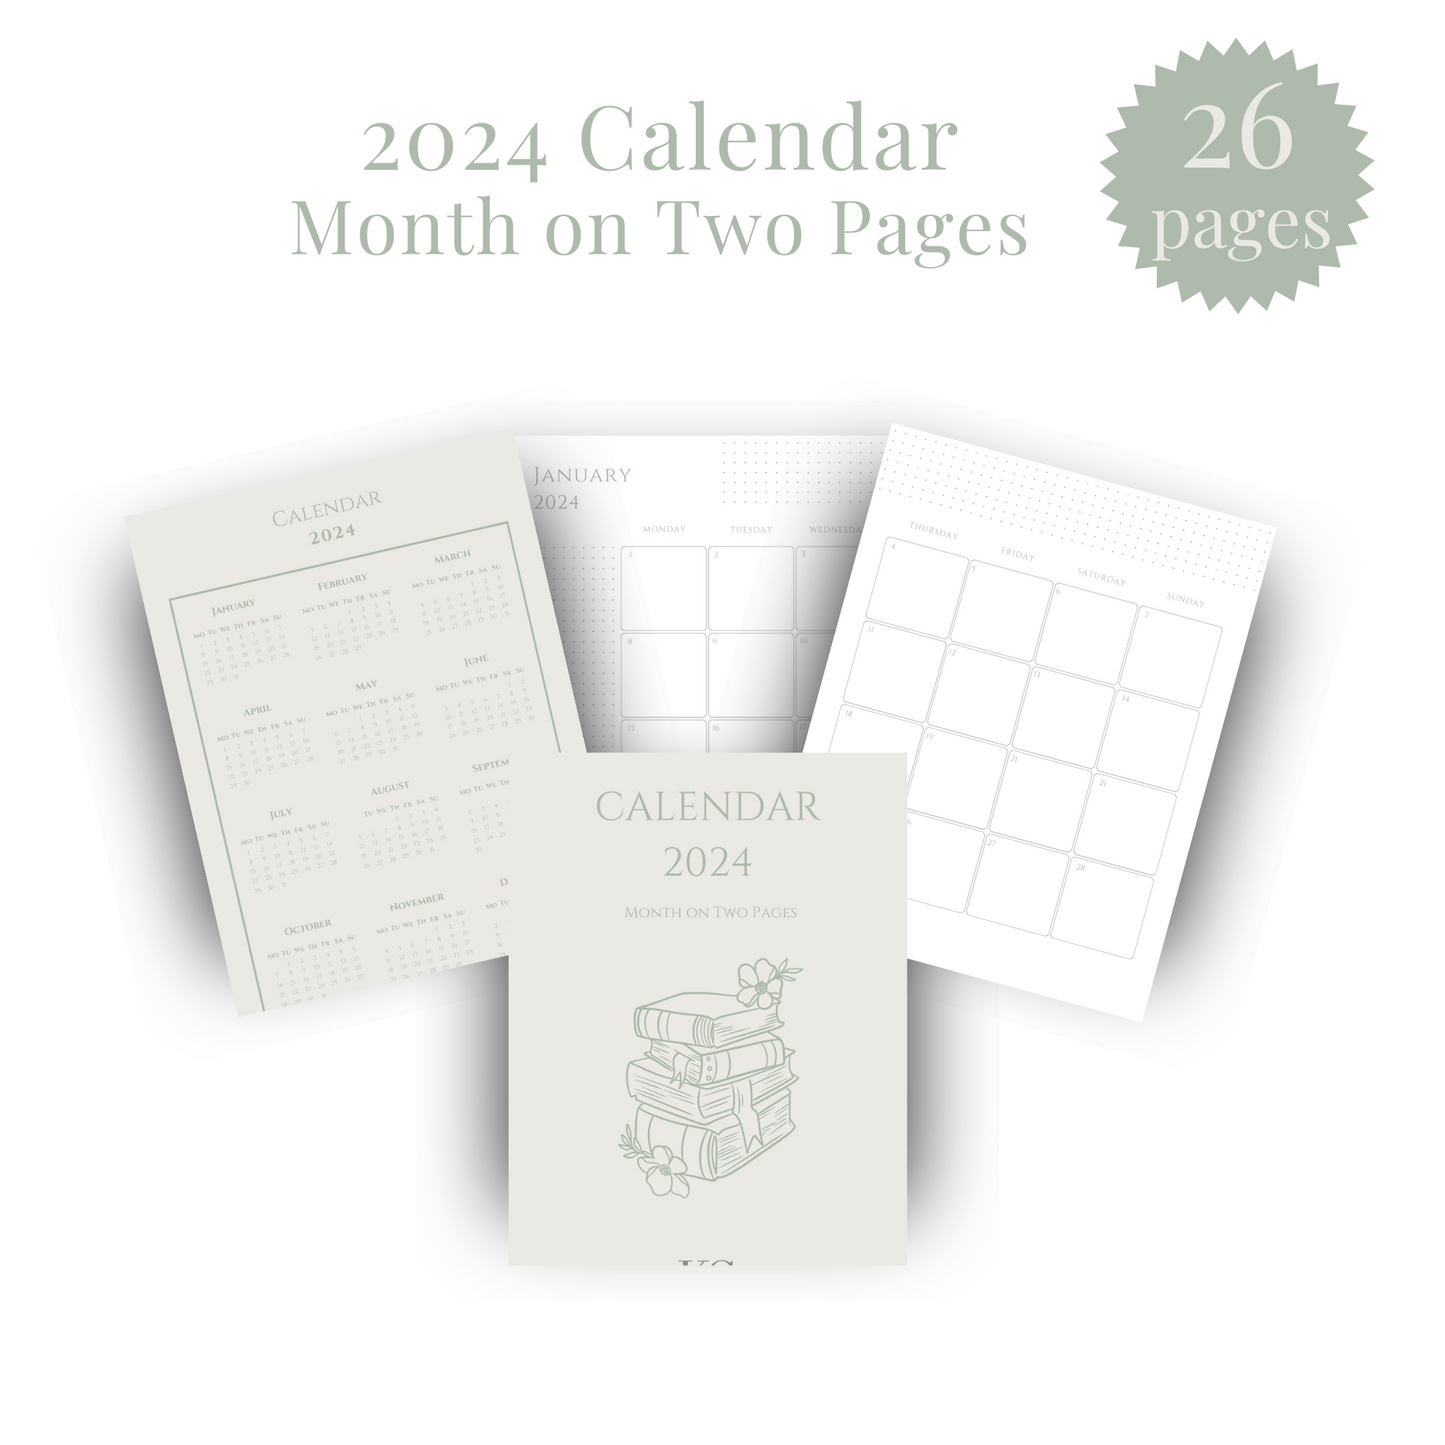 2024 Calendar Month on 2 Pages